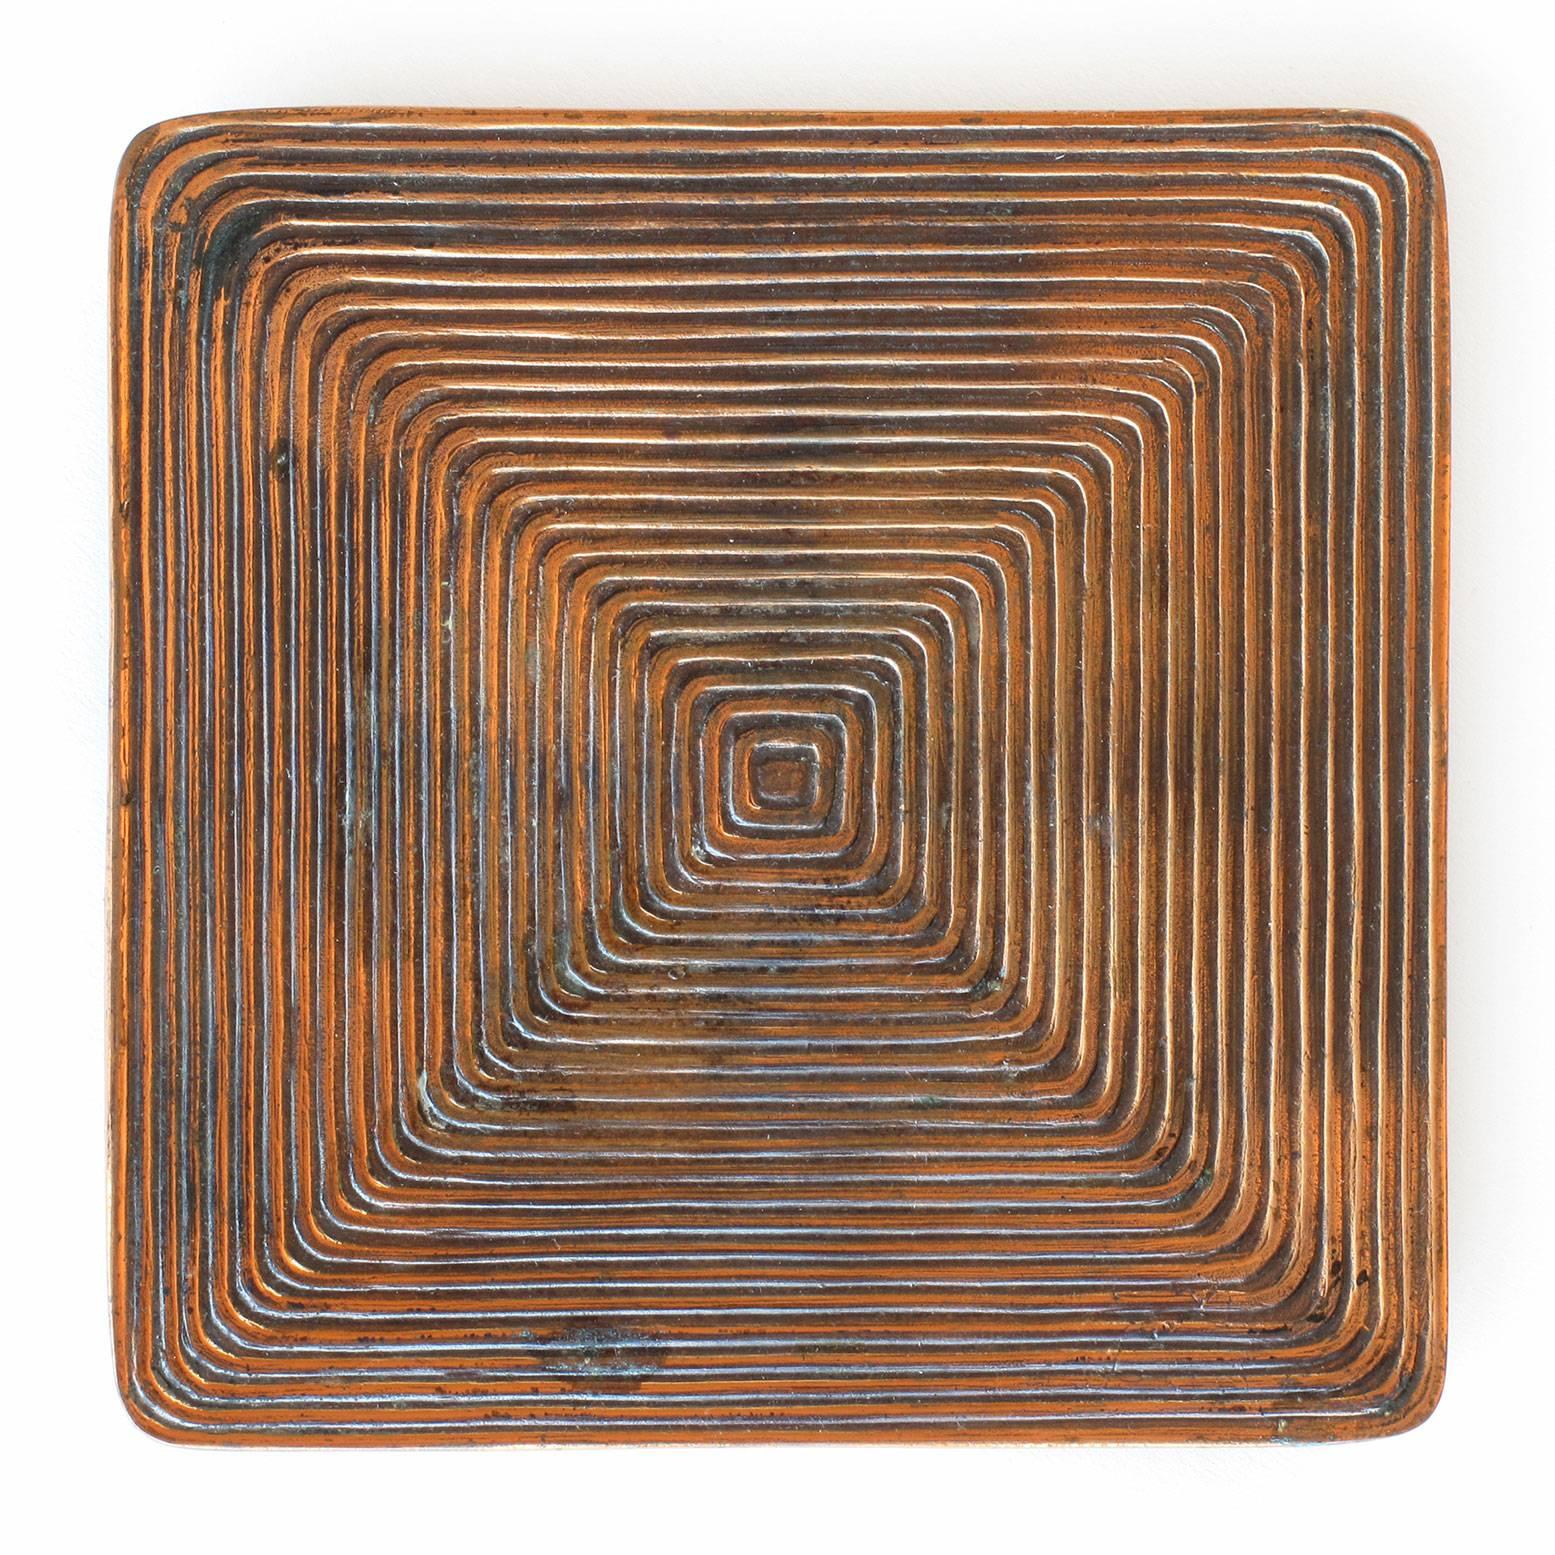 Metal Ben Seibel Square Shaped Copper Tray with Concentric Squares Design Jenfred Ware For Sale